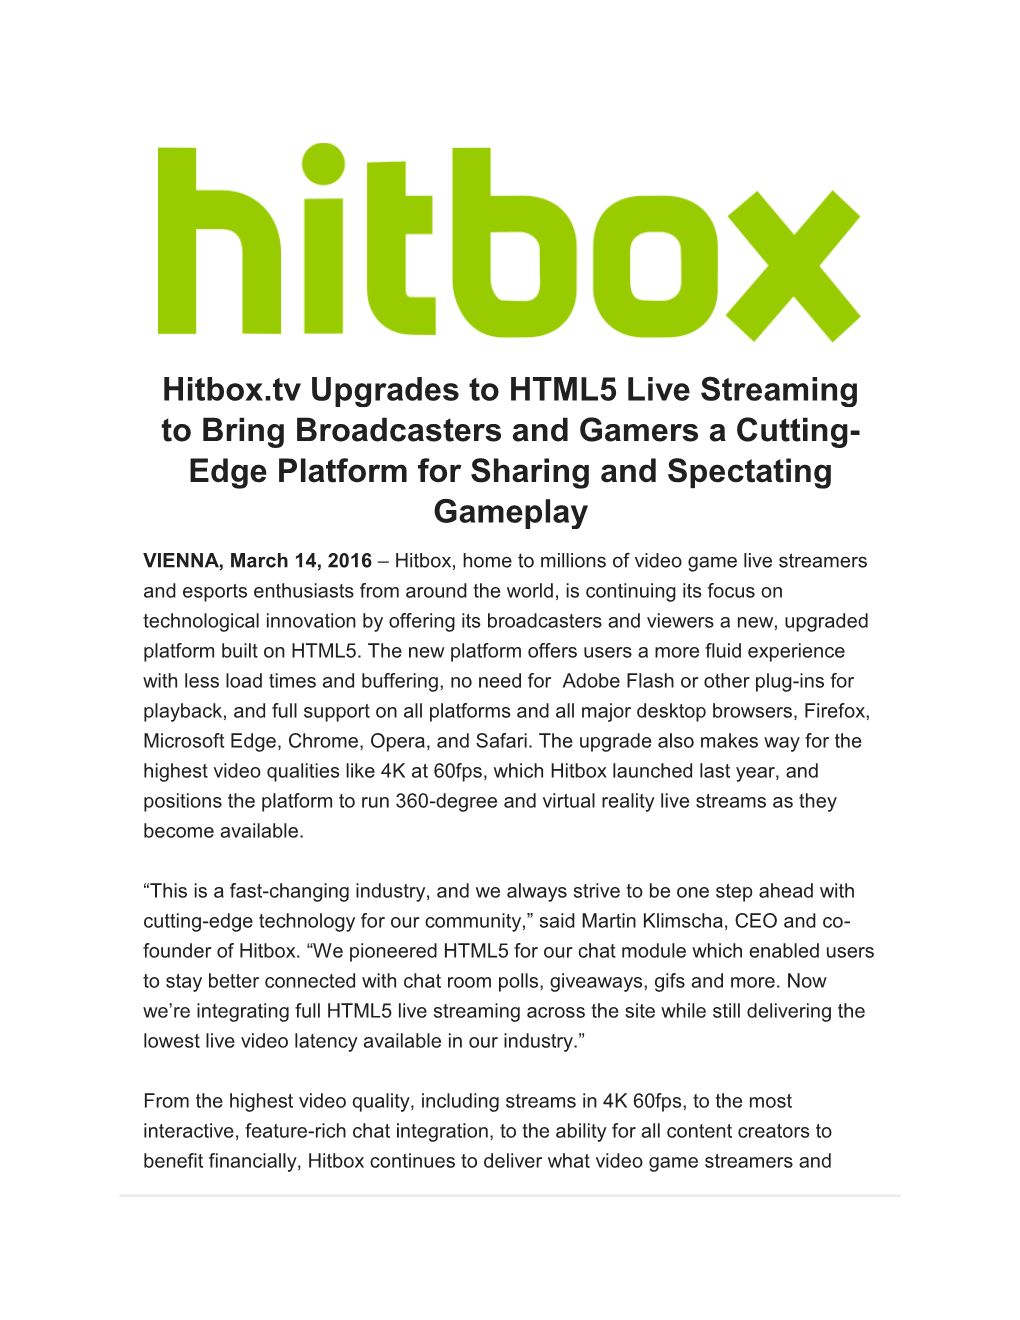 Hitbox.Tv Upgrades to HTML5 Live Streaming to Bring Broadcasters and Gamers a Cutting- Edge Platform for Sharing and Spectating Gameplay